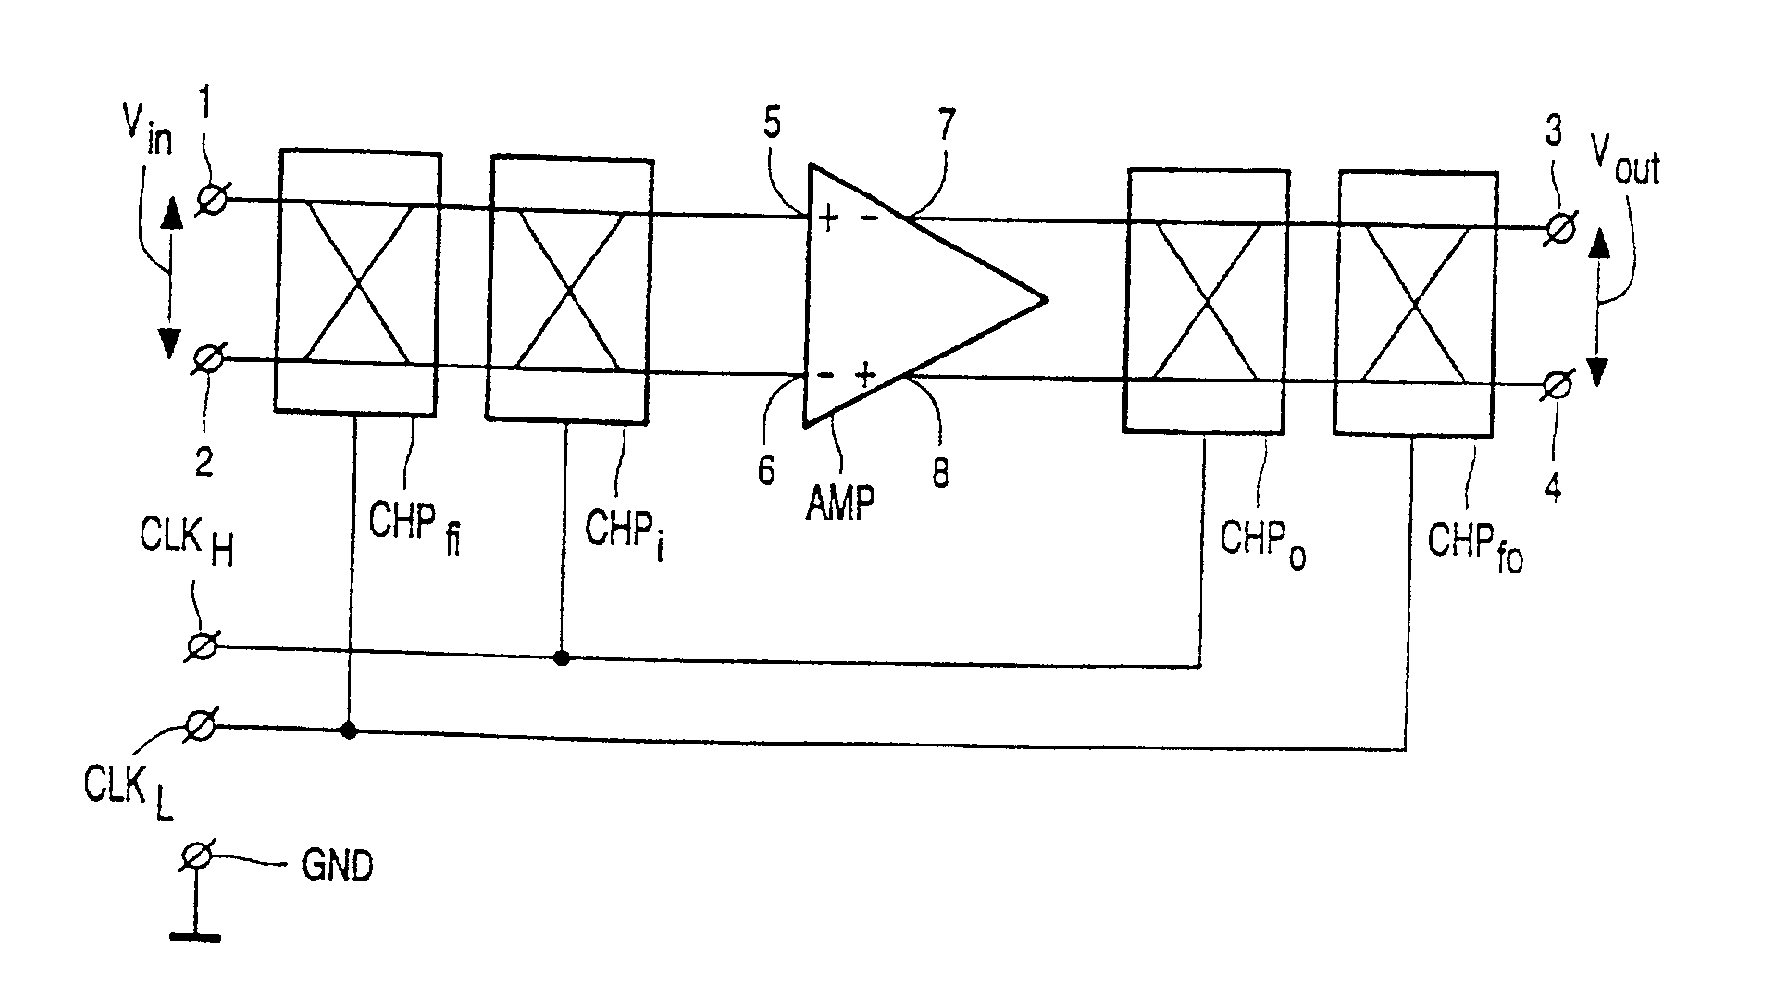 Circuit, including feedback, for reducing DC-offset and noise produced by an amplifier